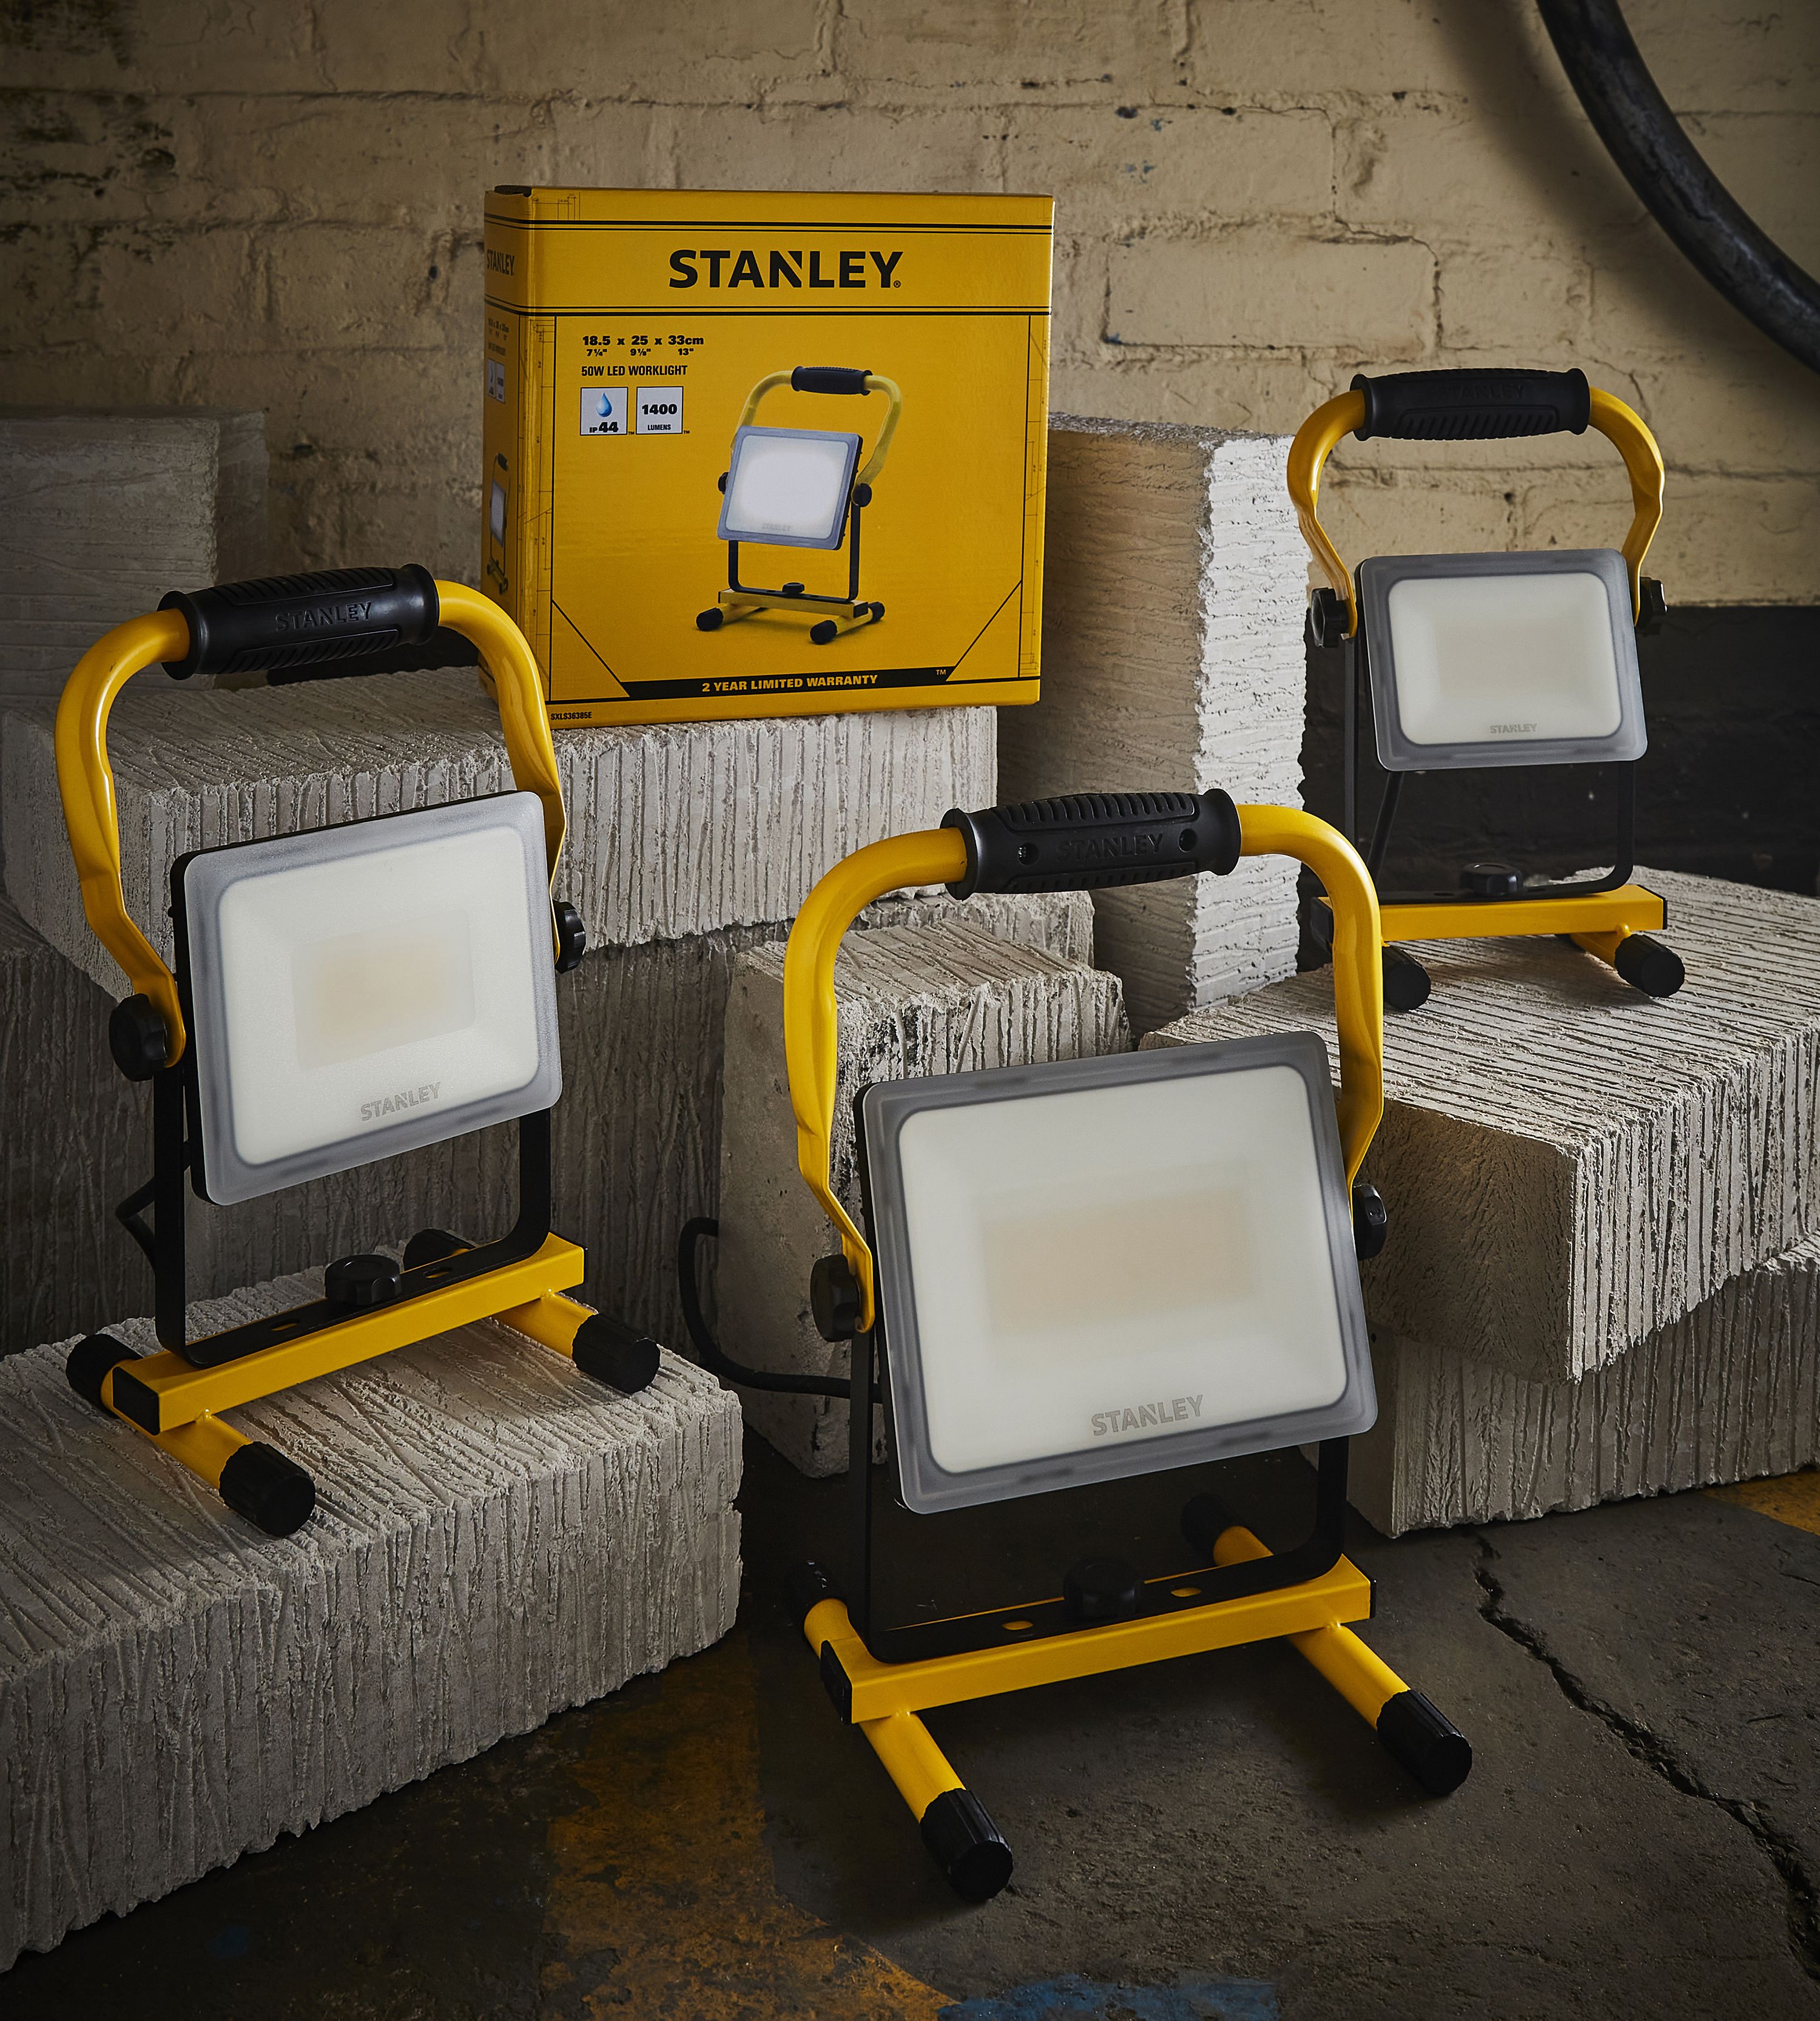 Stanley 50W 3500lm Corded Integrated LED Portable Work light